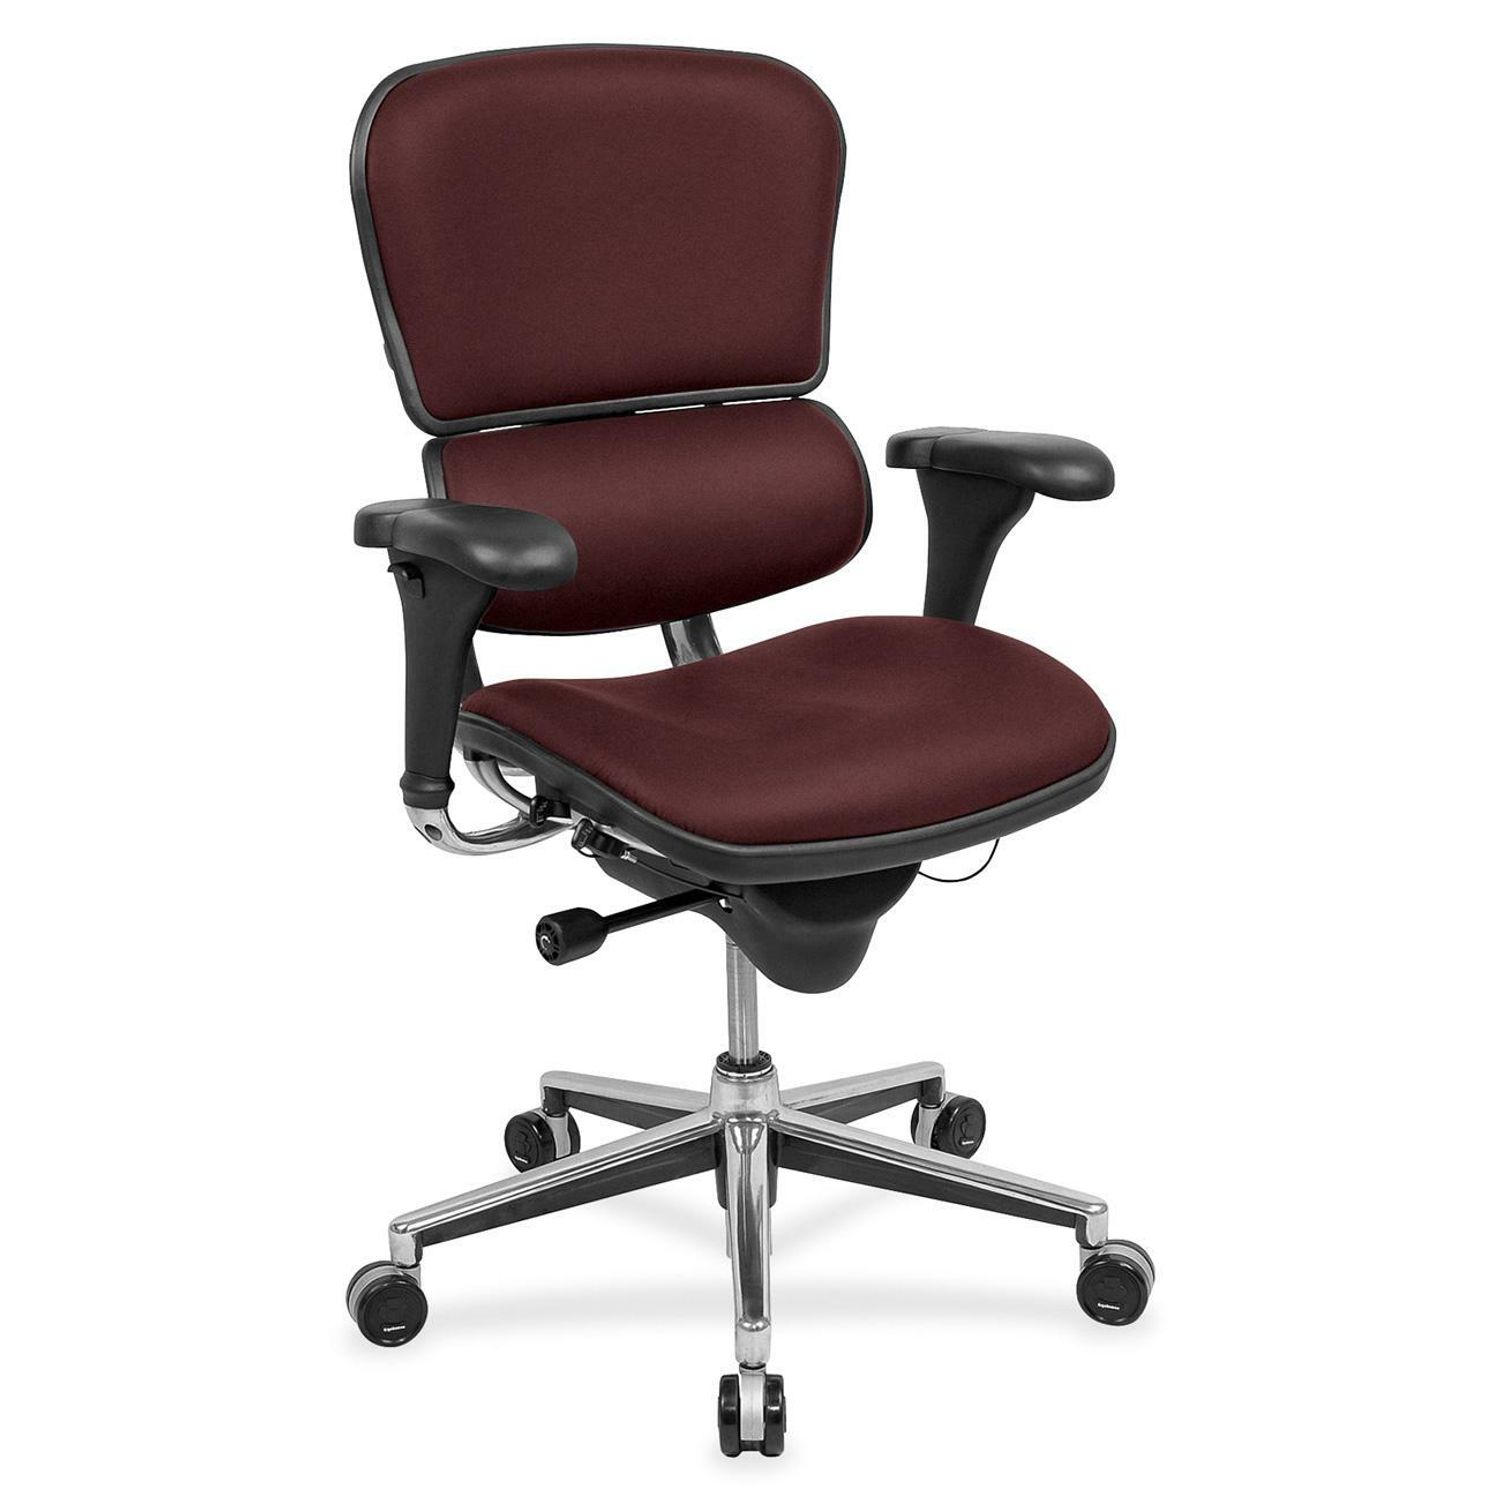 ergohuman LE10ERGLO Mid Back Management Chair Burgundy Perfection Fabric Seat, Burgundy Perfection Fabric Back, 5-star Base, 1 Each